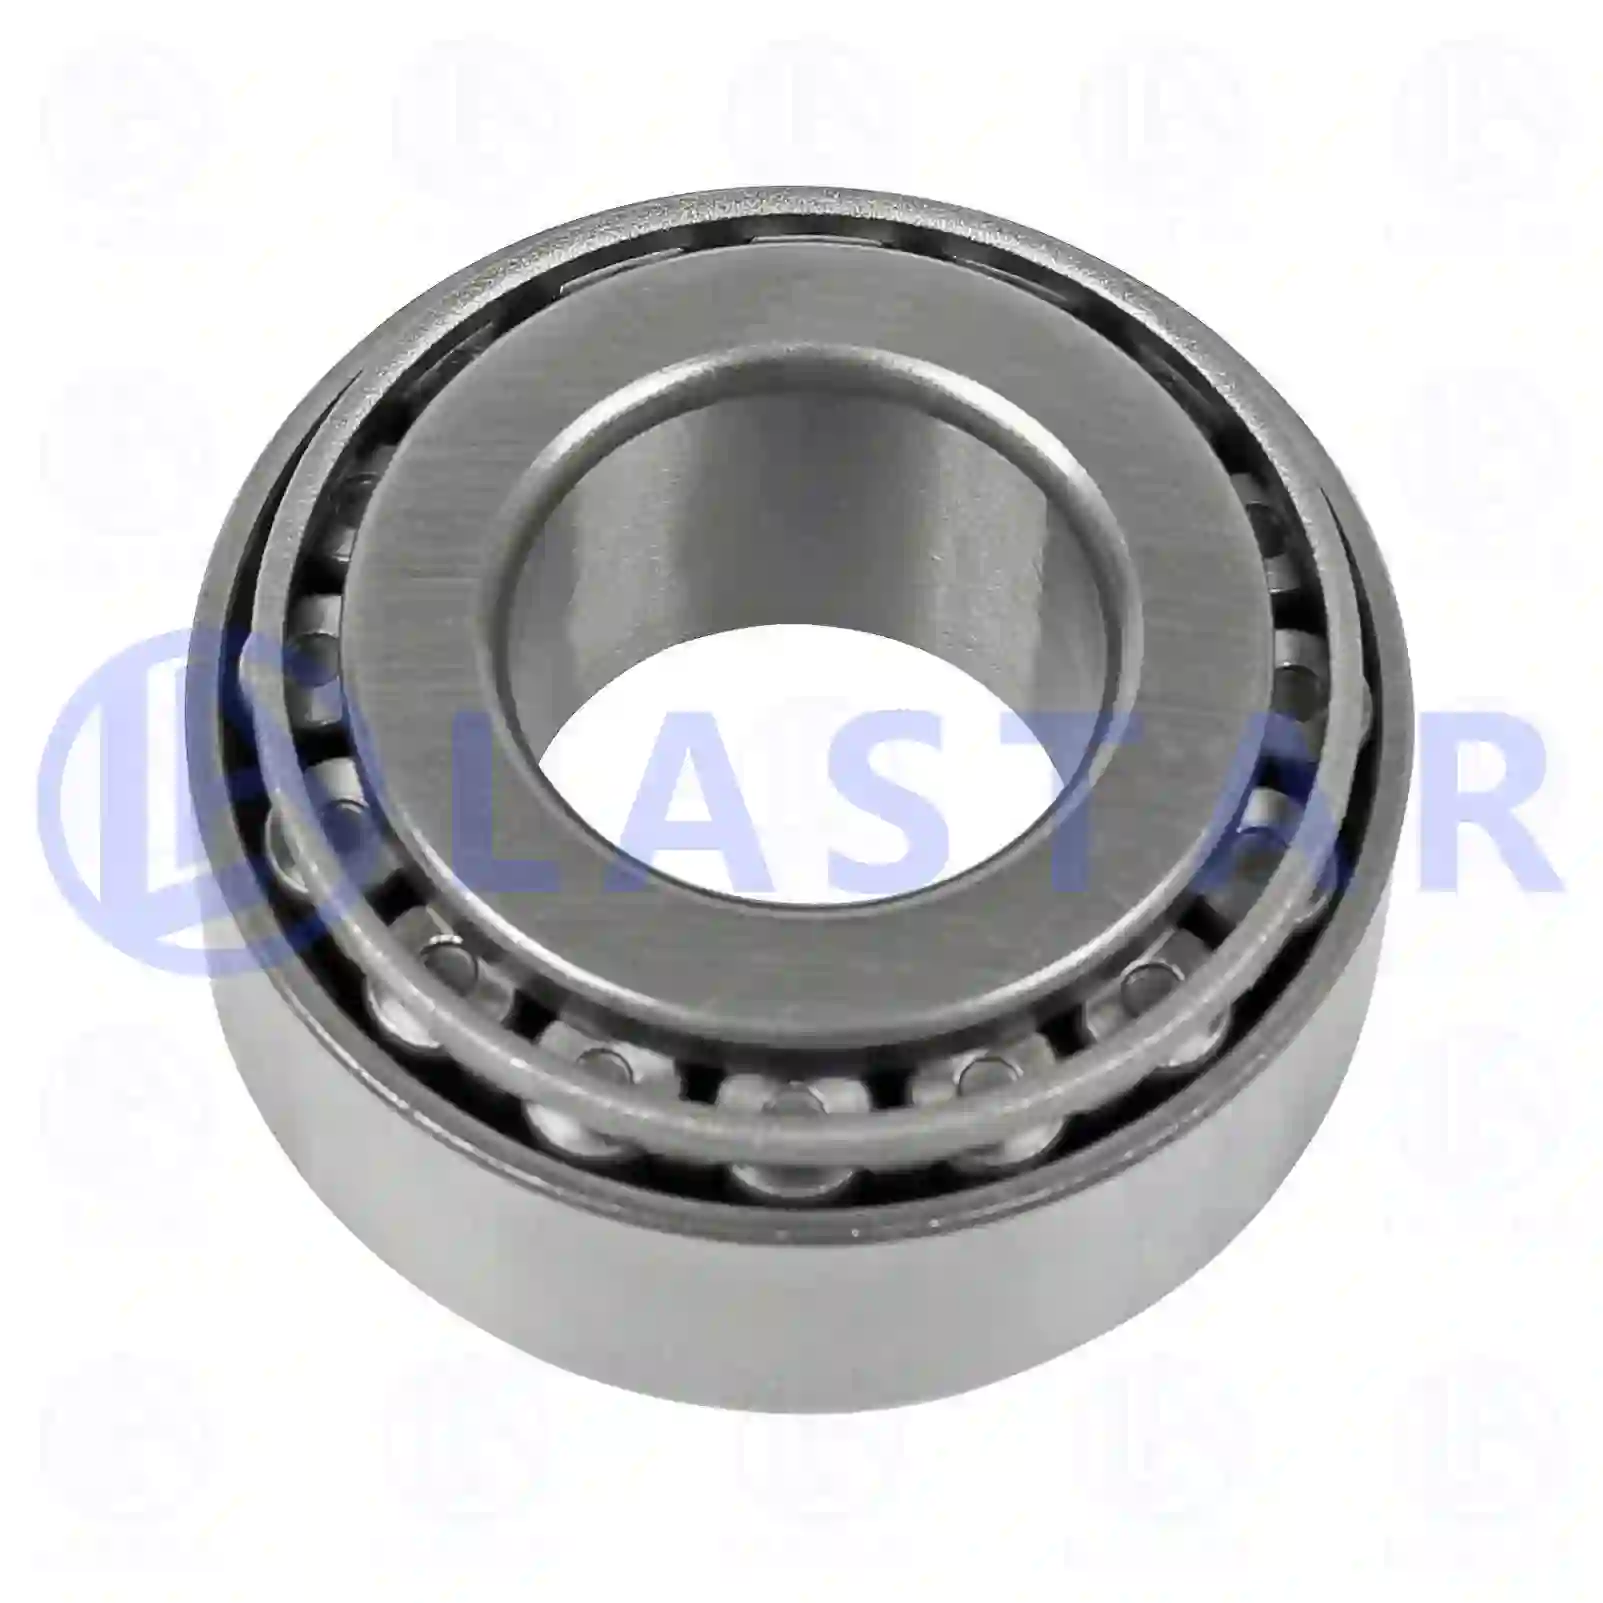 Hub Tapered roller bearing, la no: 77726056 ,  oem no:5103869AA, FRC7810, 06324990069, 81320500508, 0039811005, 0039811505, 0039819505, 0059812205, 0069815805, 1409810005, 1409810505, 5001852654, 5003090903, 5010136758, 2D0407625, ZG03018-0008 Lastar Spare Part | Truck Spare Parts, Auotomotive Spare Parts